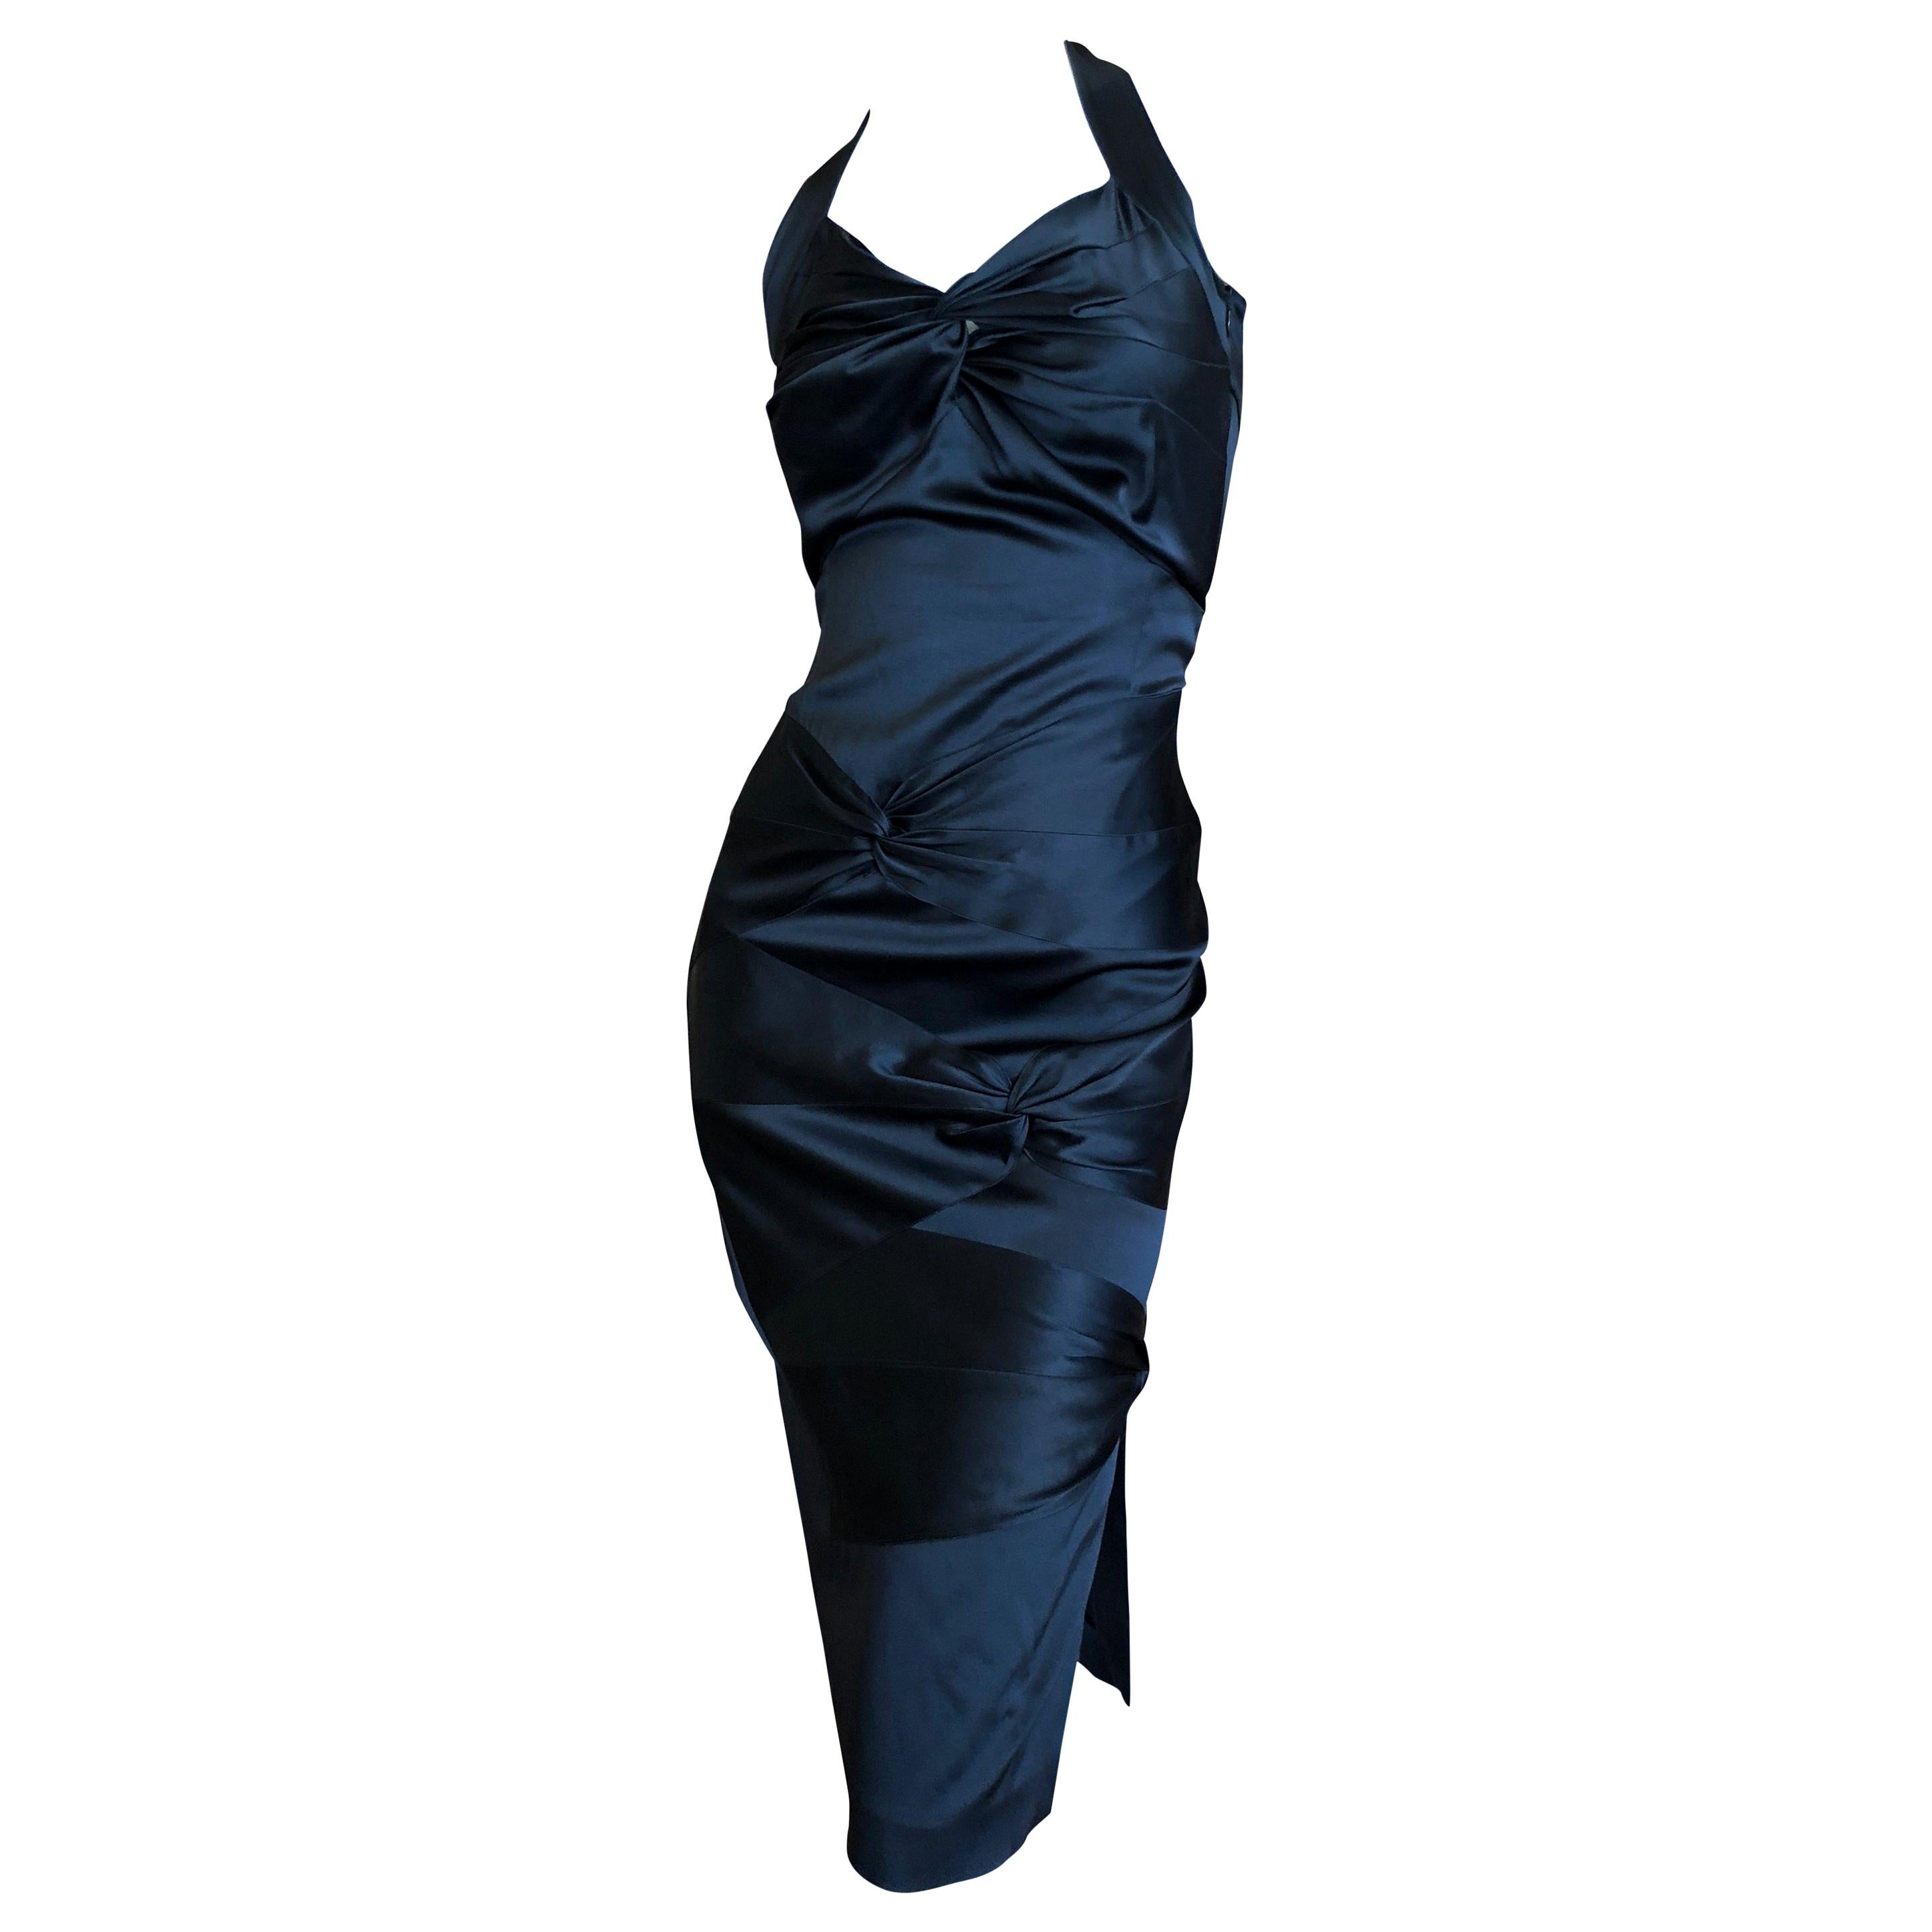 Christian Dior by John Galliano Black Satin Silk Lined Knot Dress For Sale